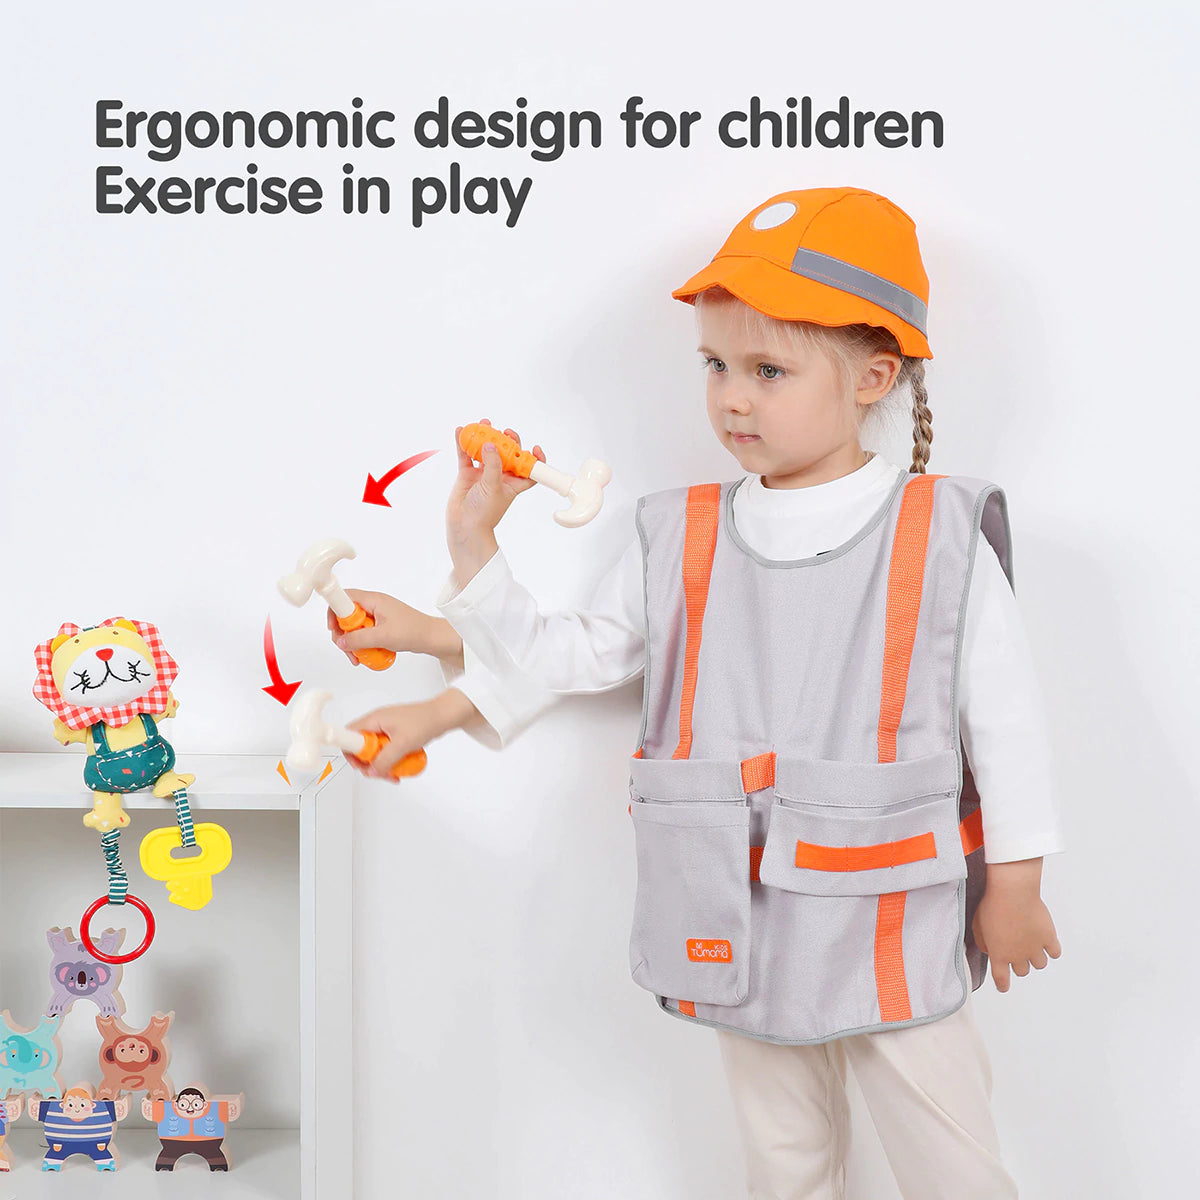 Imaginative play featuring construction fun with toy toolset